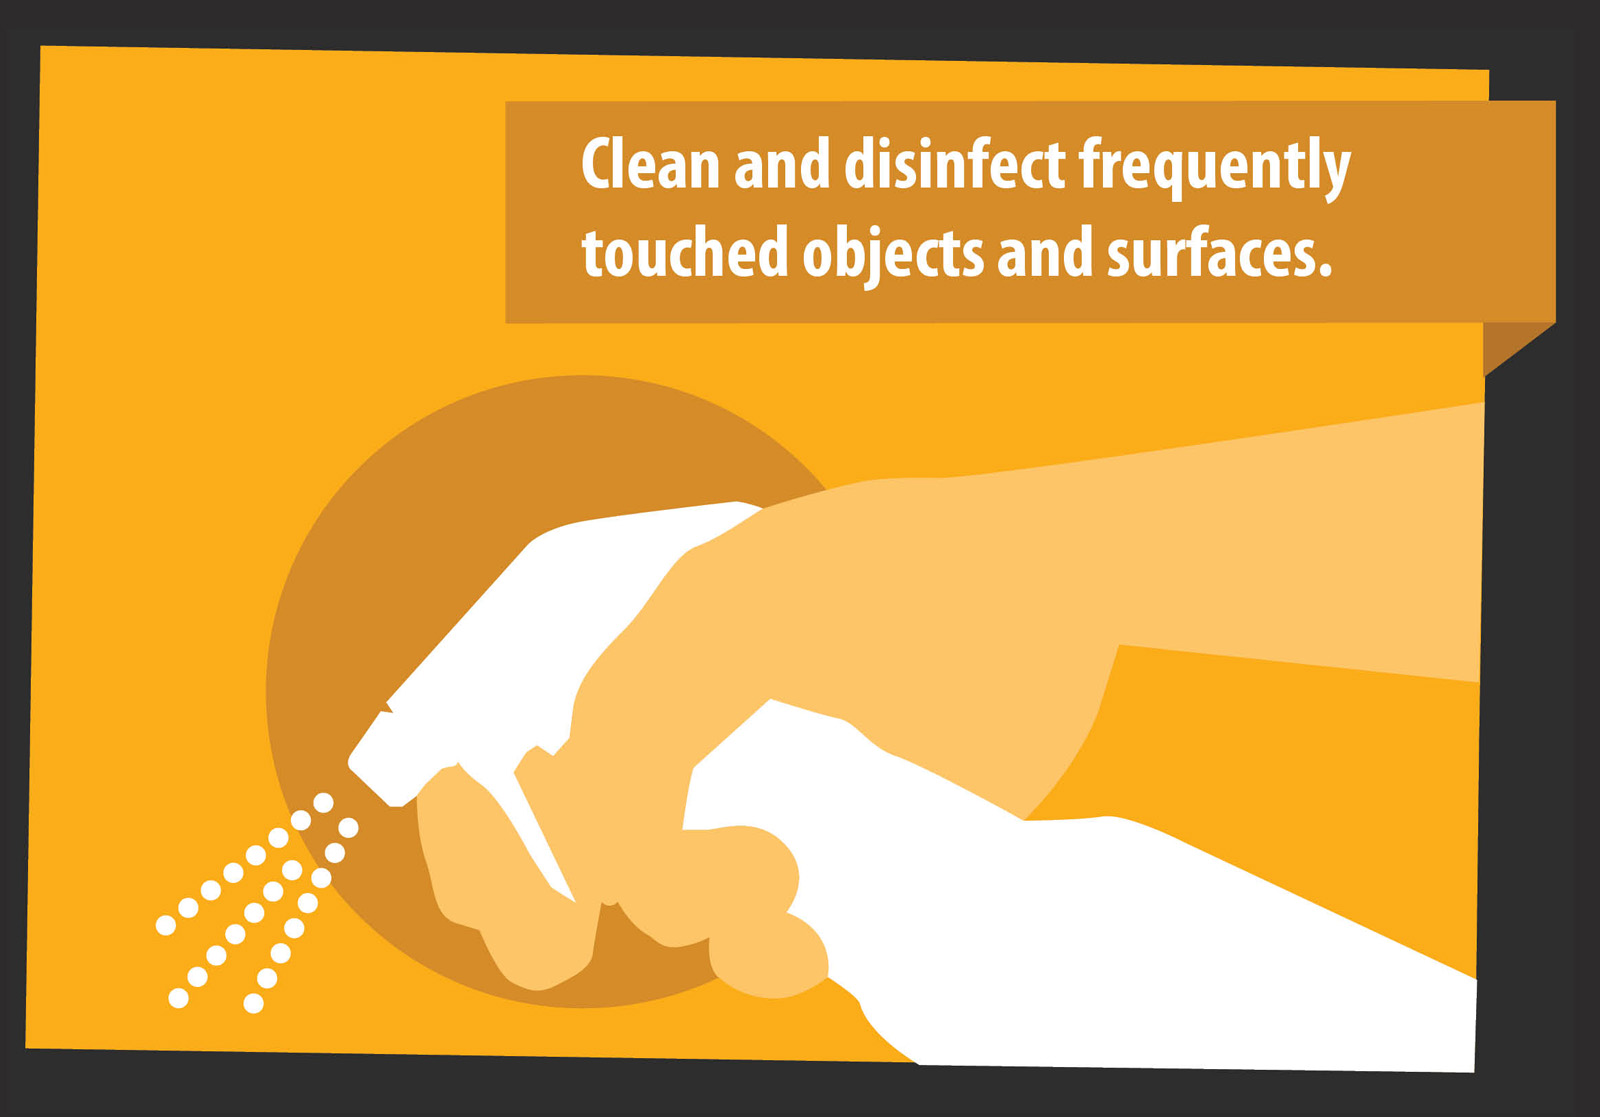 Disinfect frequently touched surfaces.